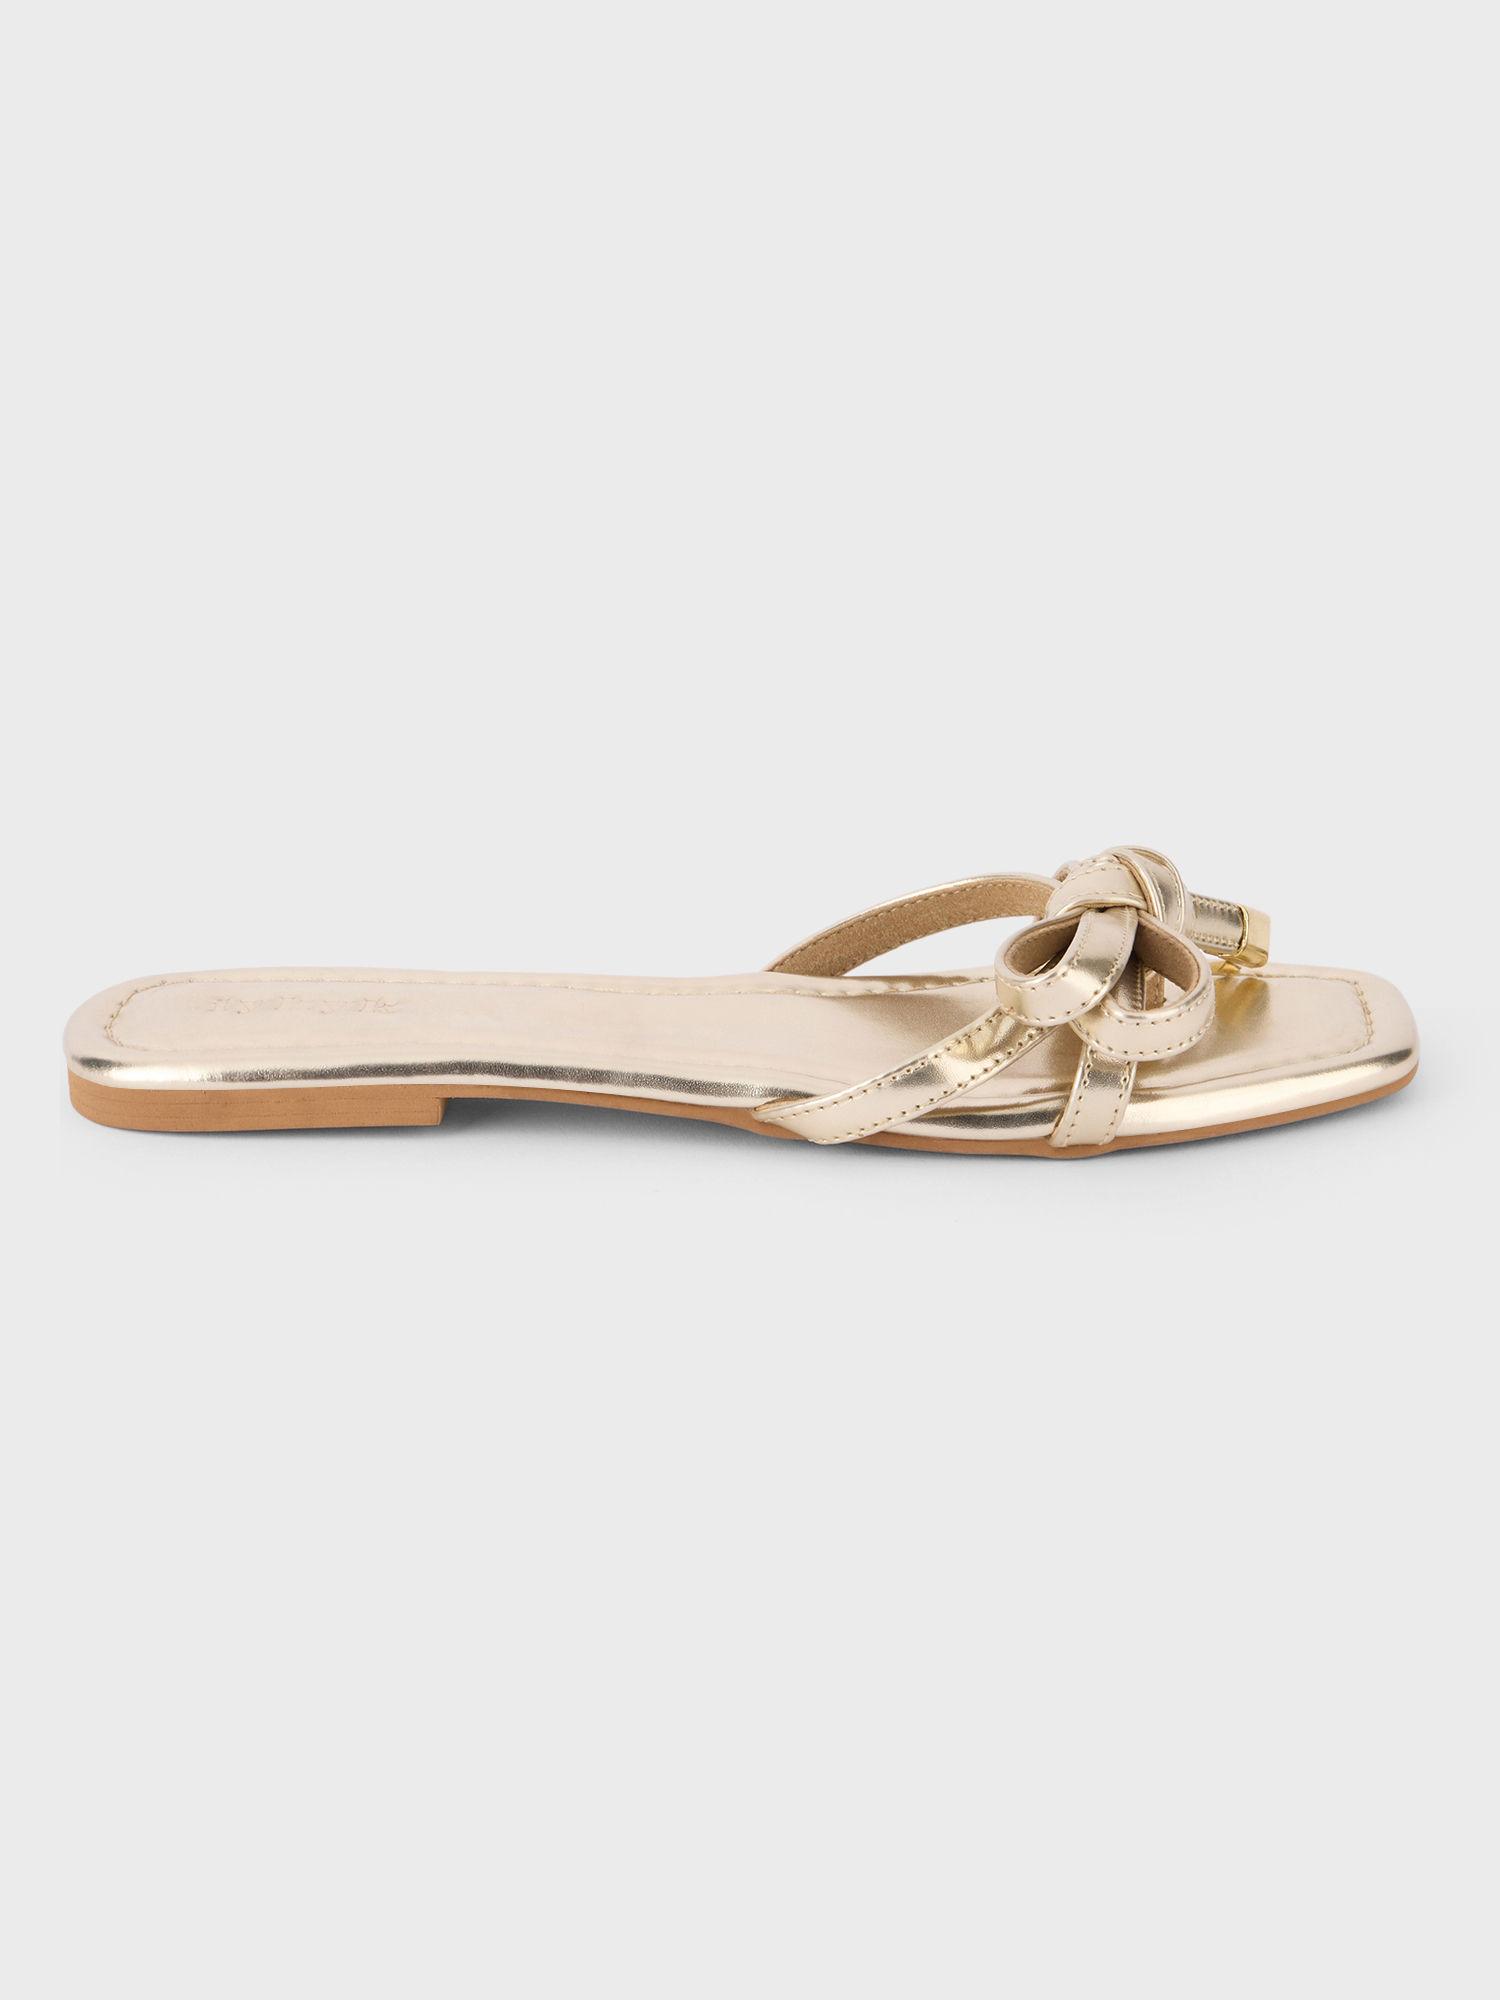 gold metallic knotted bow strappy flats